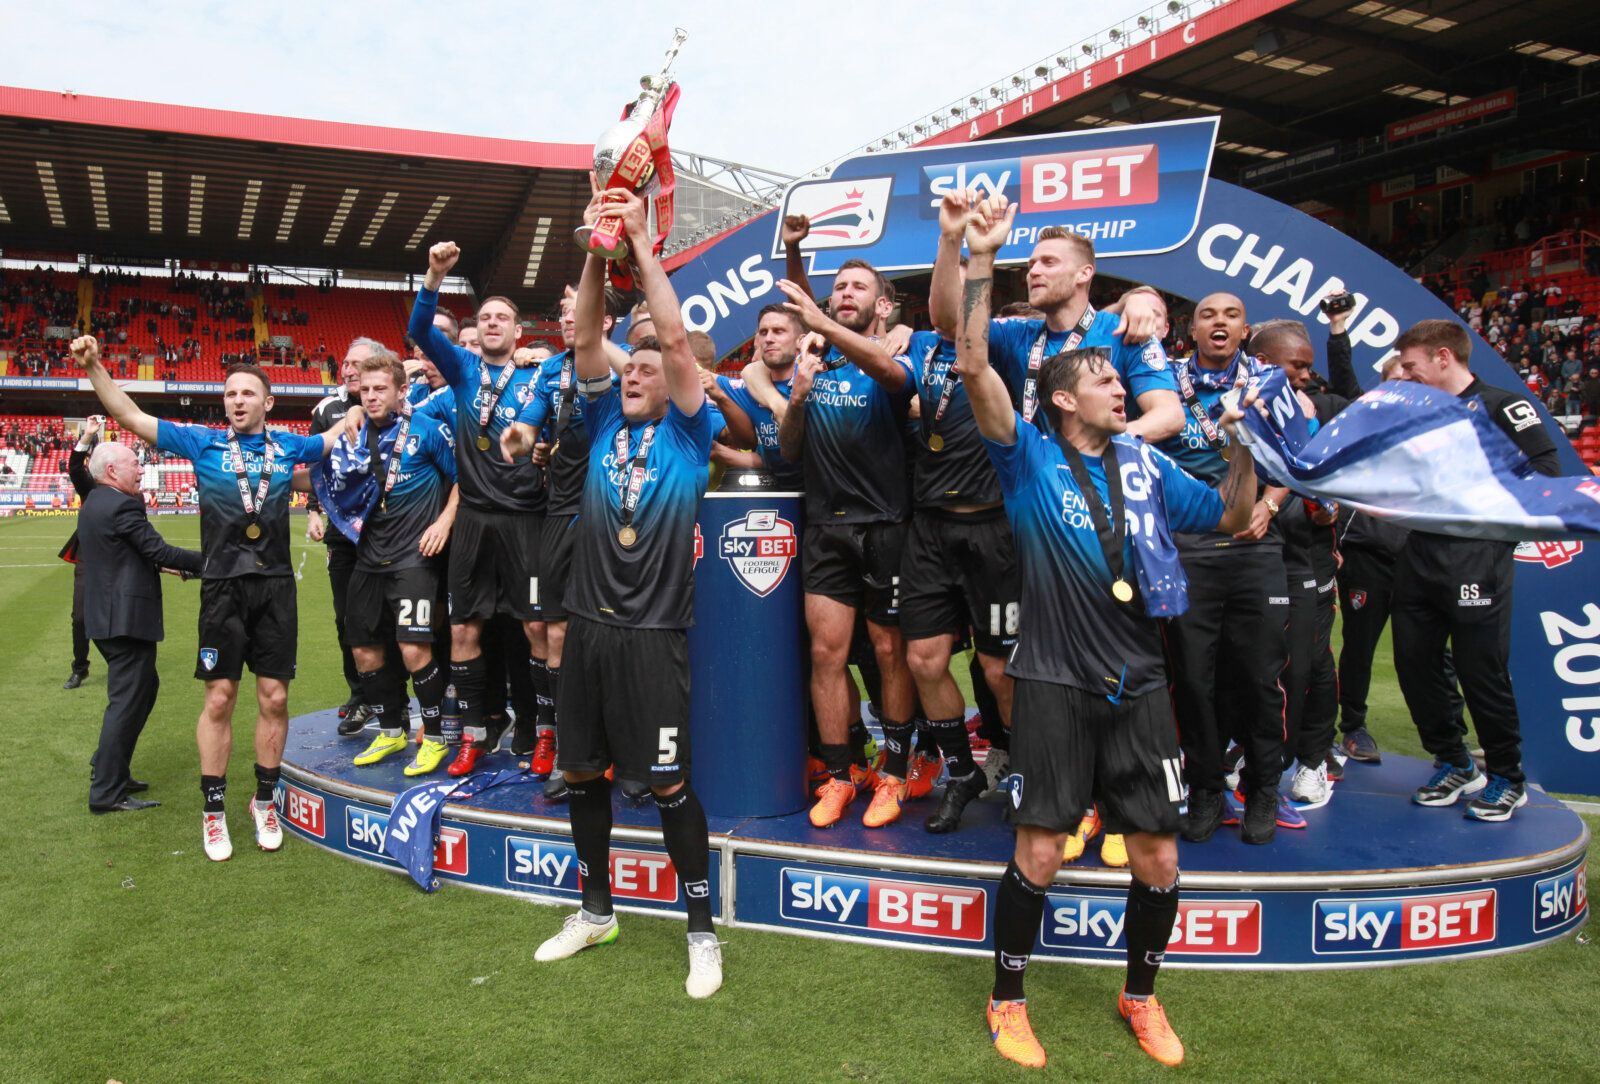 Football - Charlton Athletic v AFC Bournemouth - Sky Bet Football League Championship - The Valley - 2/5/15 
Bournemouth celebrate winning the Sky Bet Football League Championship with the trophy after the game 
Action Images via Reuters / John Marsh 
Livepic 
EDITORIAL USE ONLY. No use with unauthorized audio, video, data, fixture lists, club/league logos or 